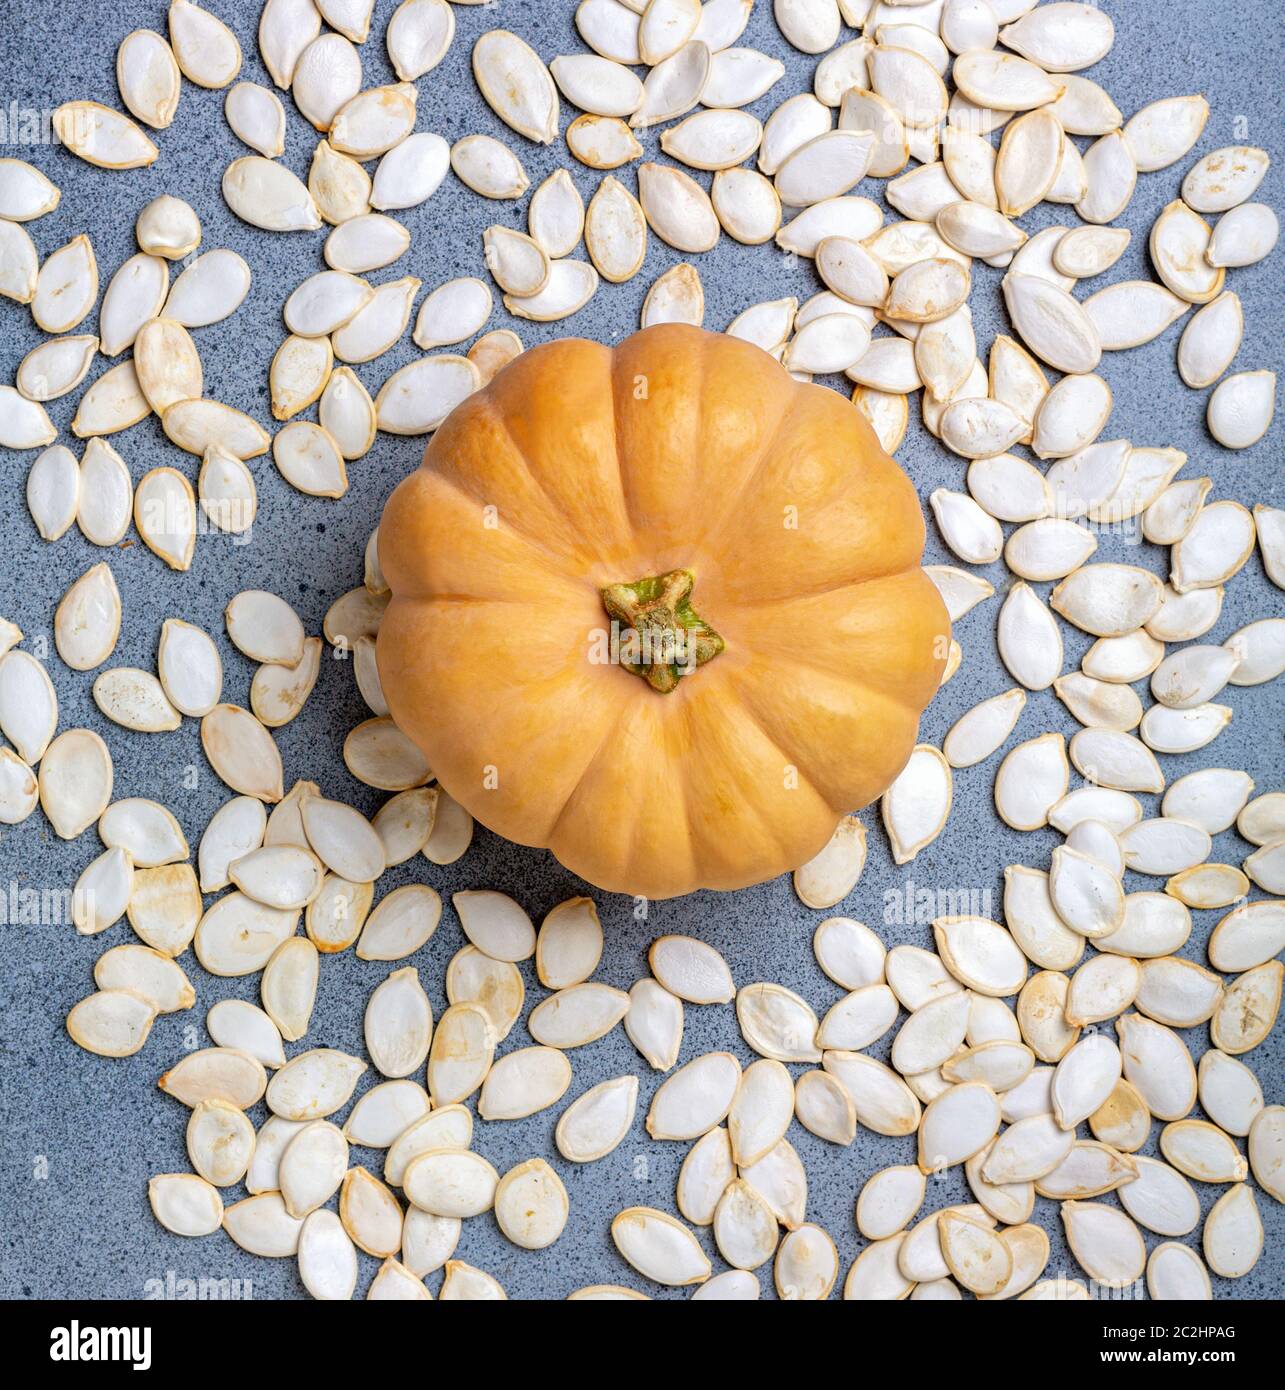 Pumpkin on scattered unpeeled seeds. Stock Photo